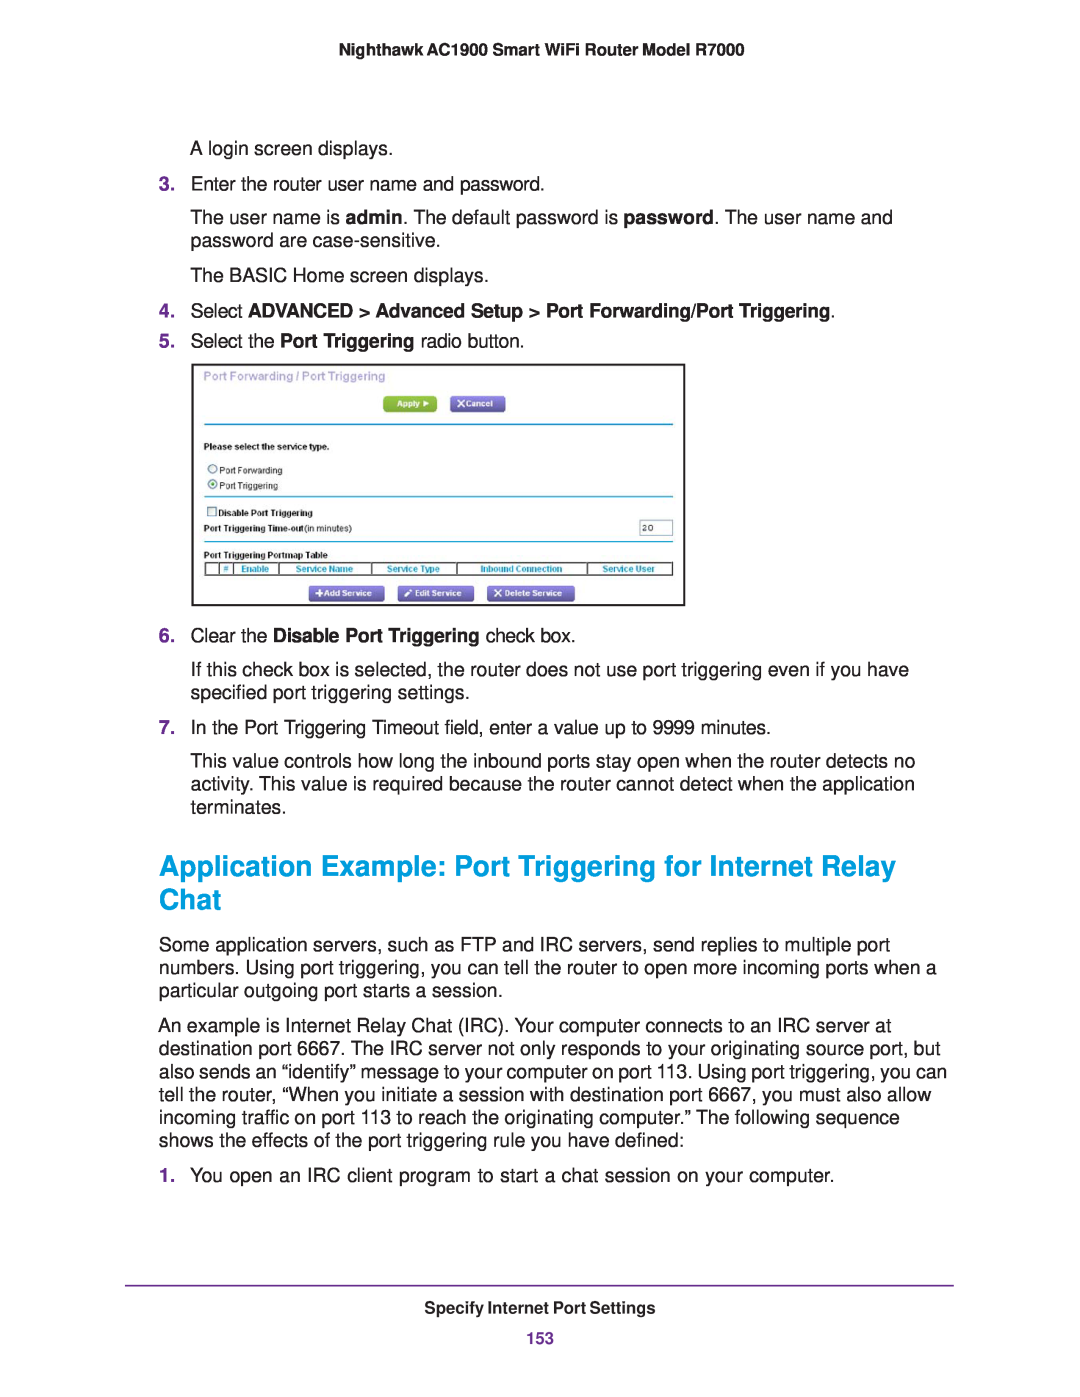 NETGEAR R7000 Application Example Port Triggering for Internet Relay Chat, Clear the Disable Port Triggering check box 